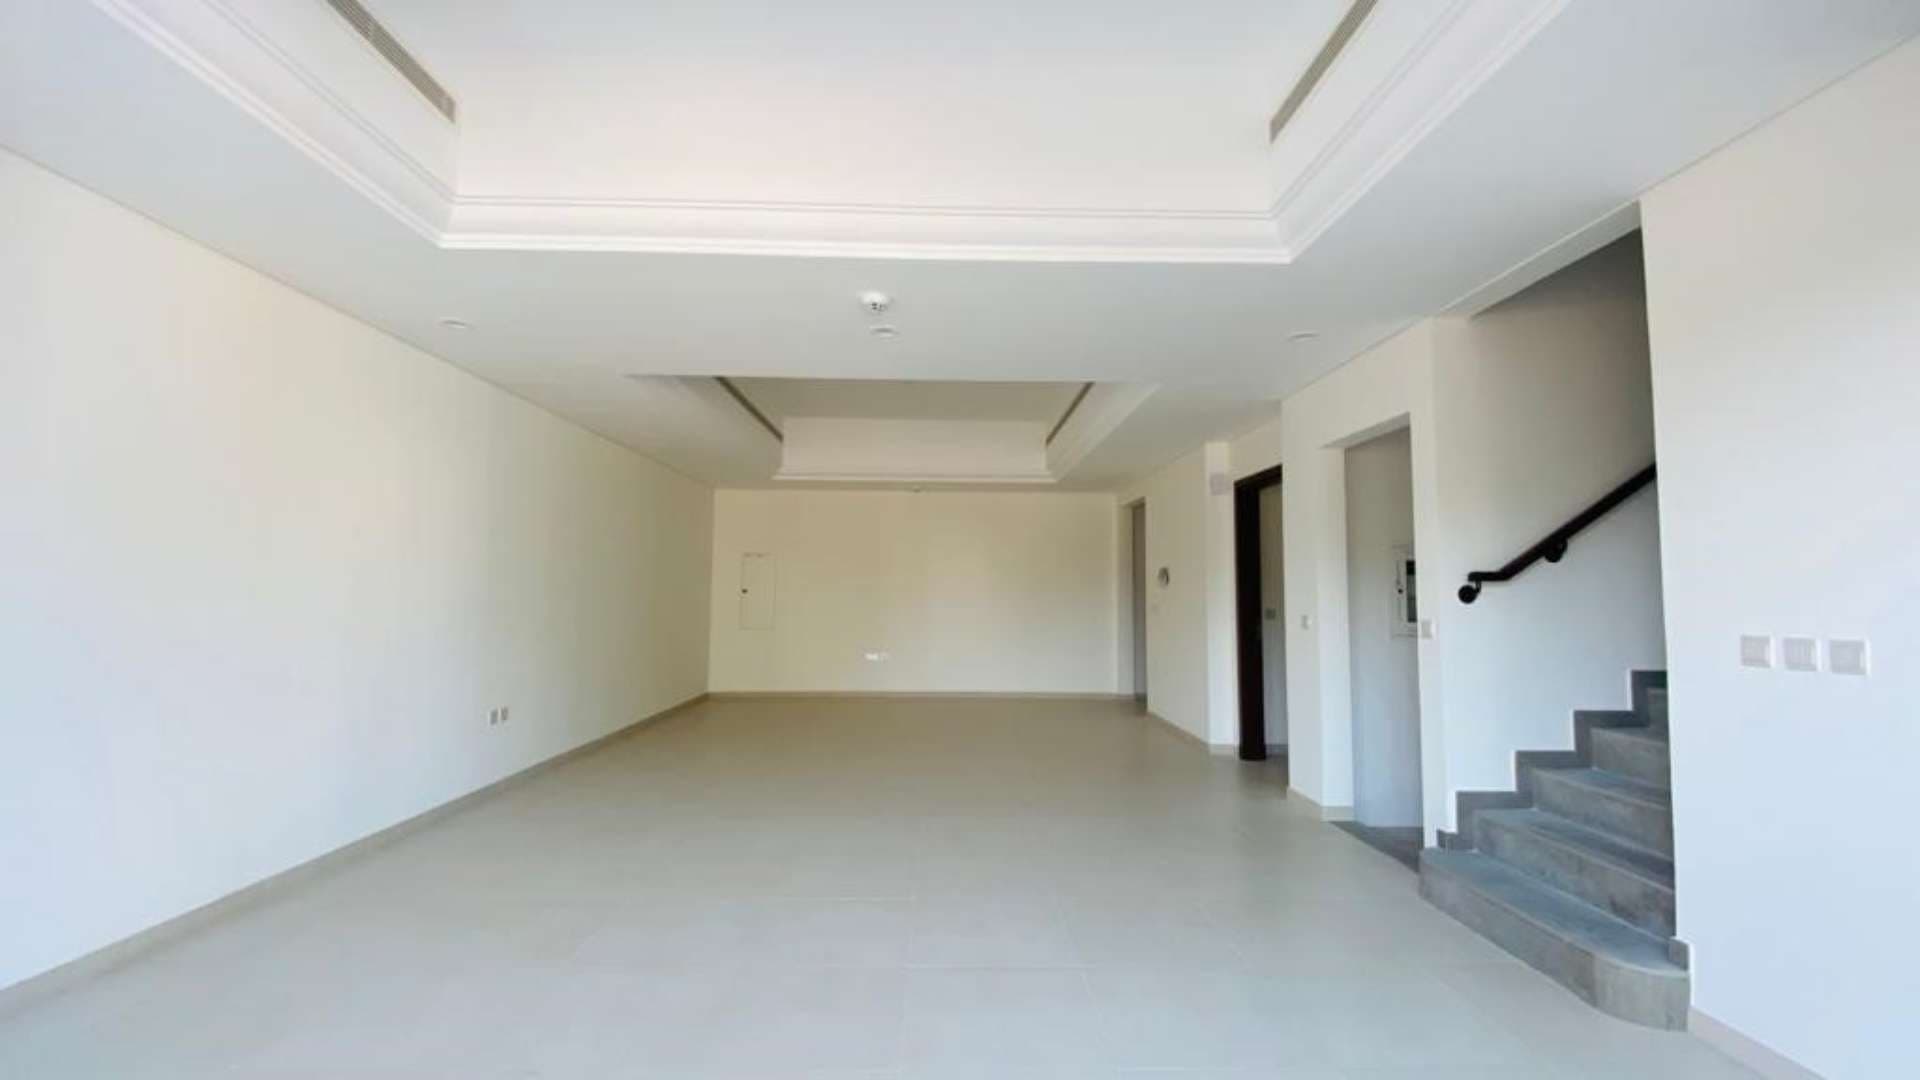 4 Bedroom Townhouse For Rent Victory Heights Lp07307 266ad53315802200.jpg